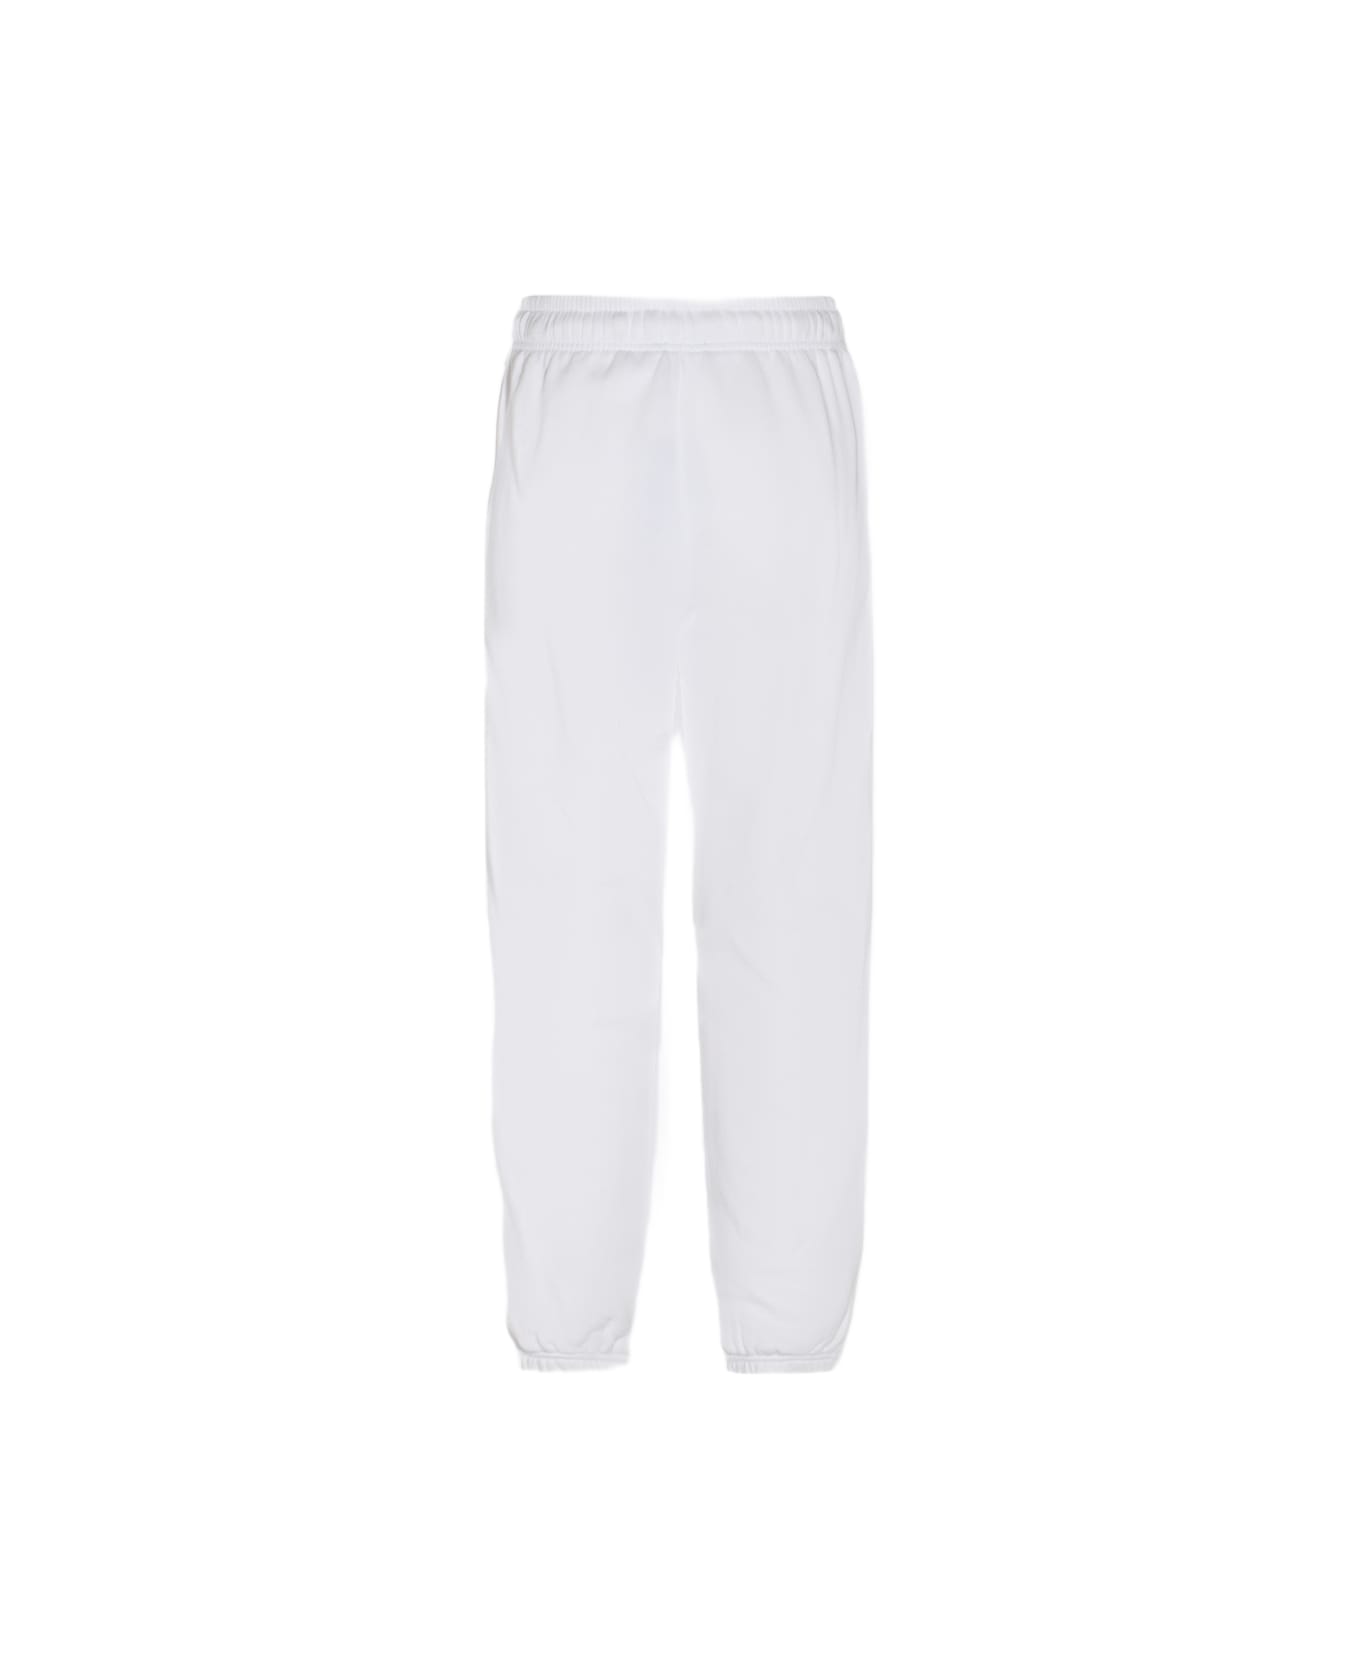 Polo Ralph Lauren White And Blue Cotton Blend Track Pants - White